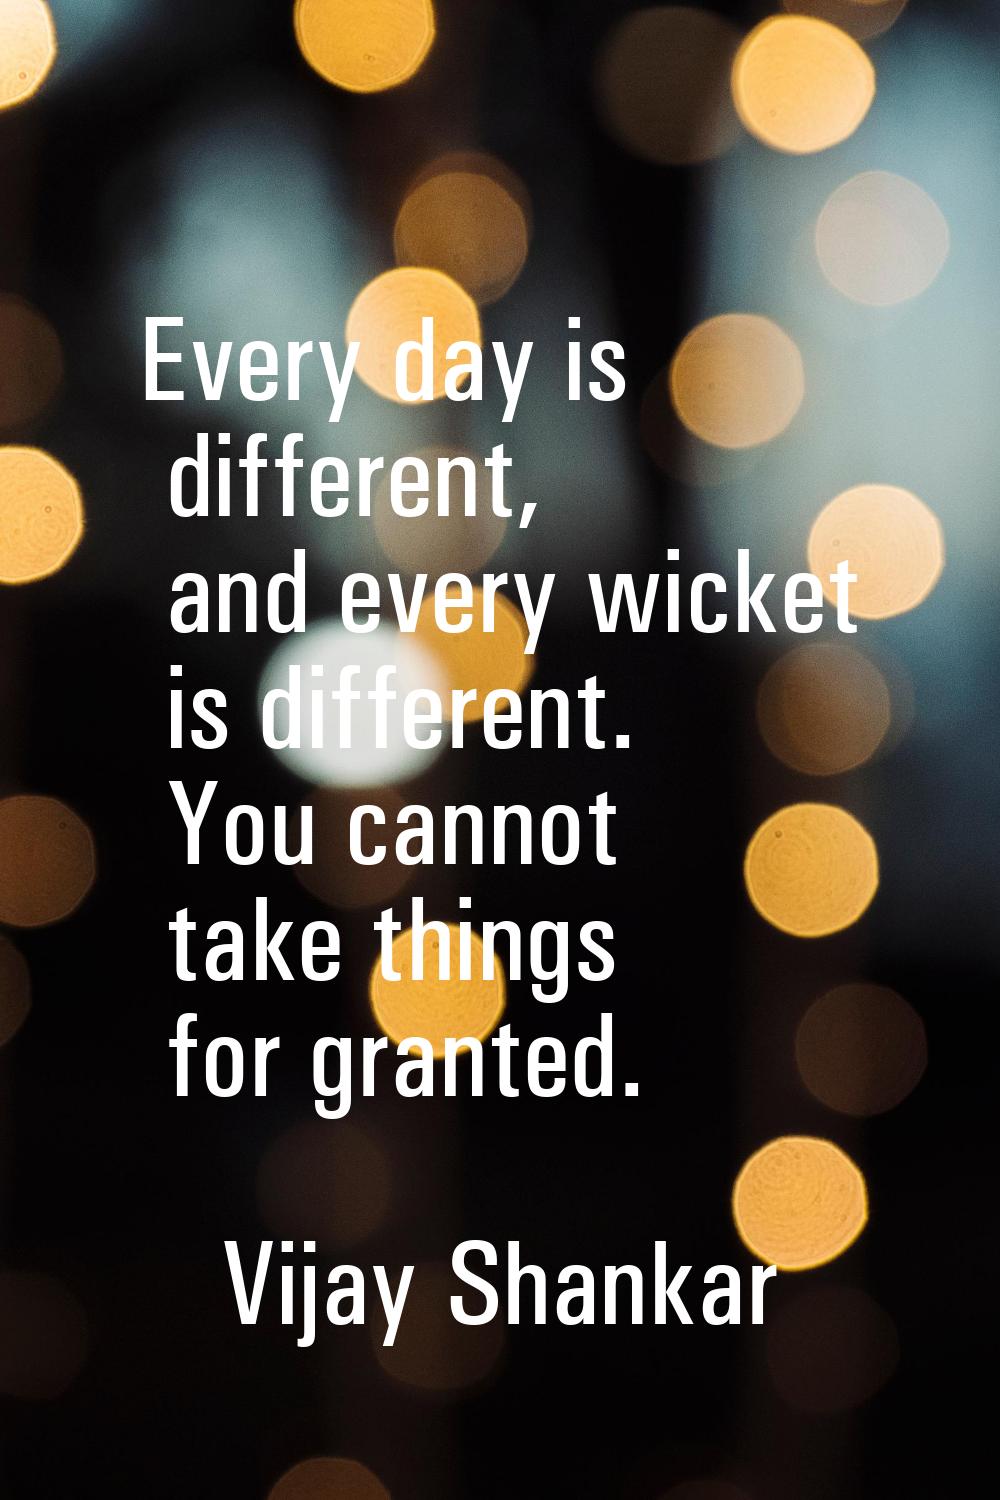 Every day is different, and every wicket is different. You cannot take things for granted.